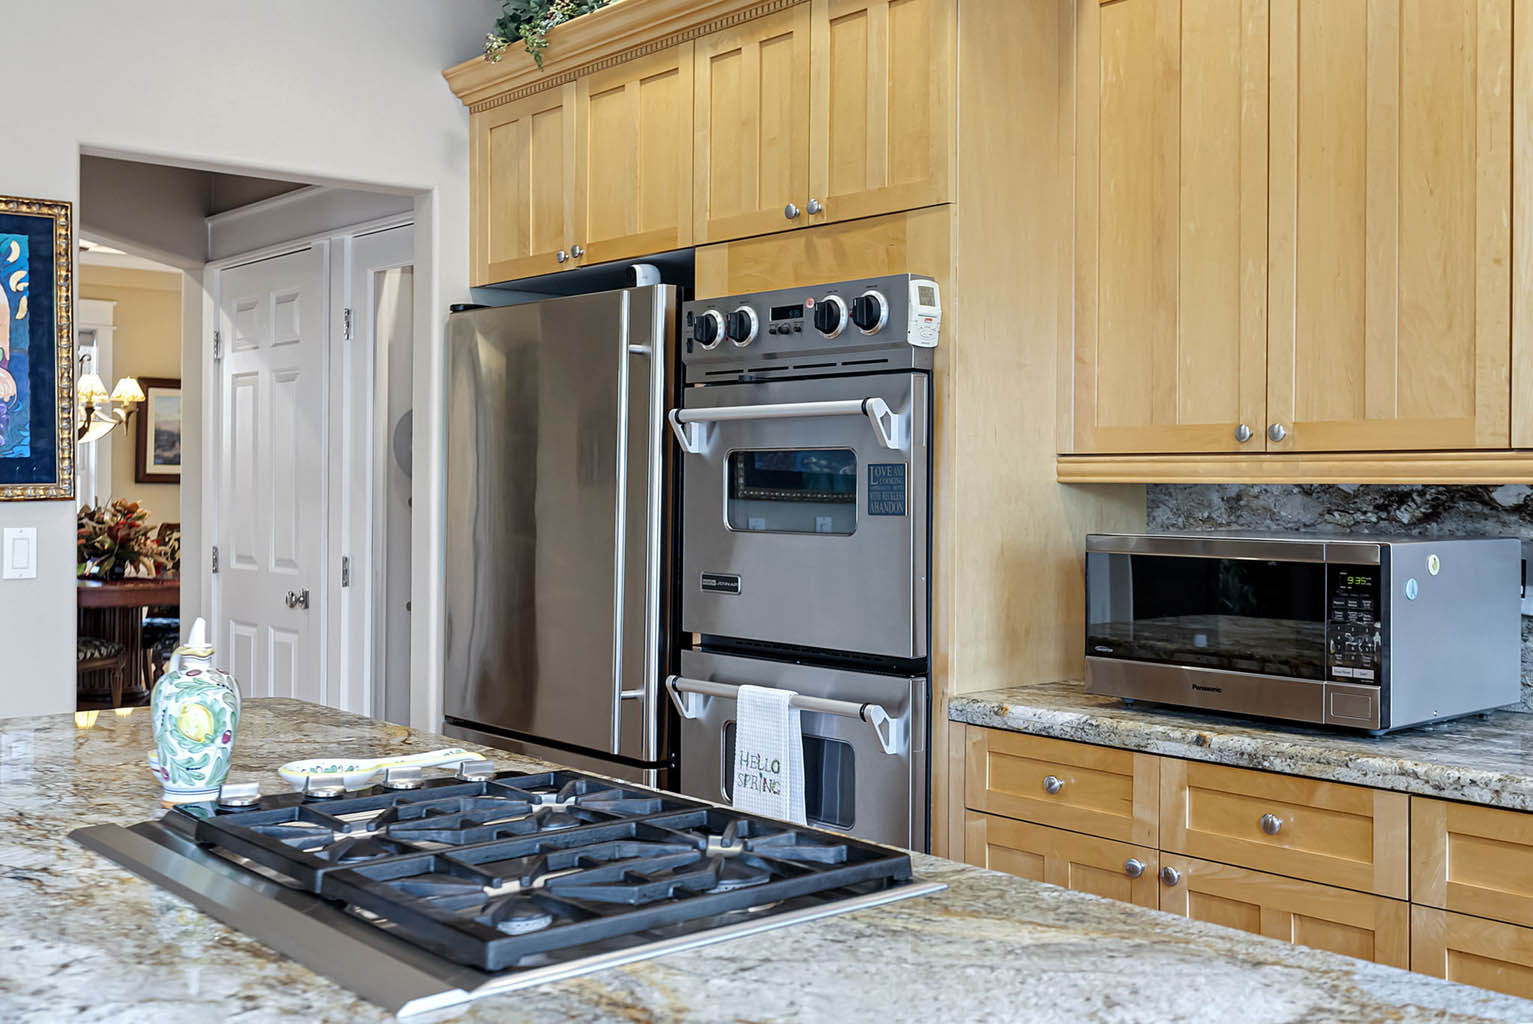 Stainless appliances including JennAir double ovens and Wolf downdraft cooktop